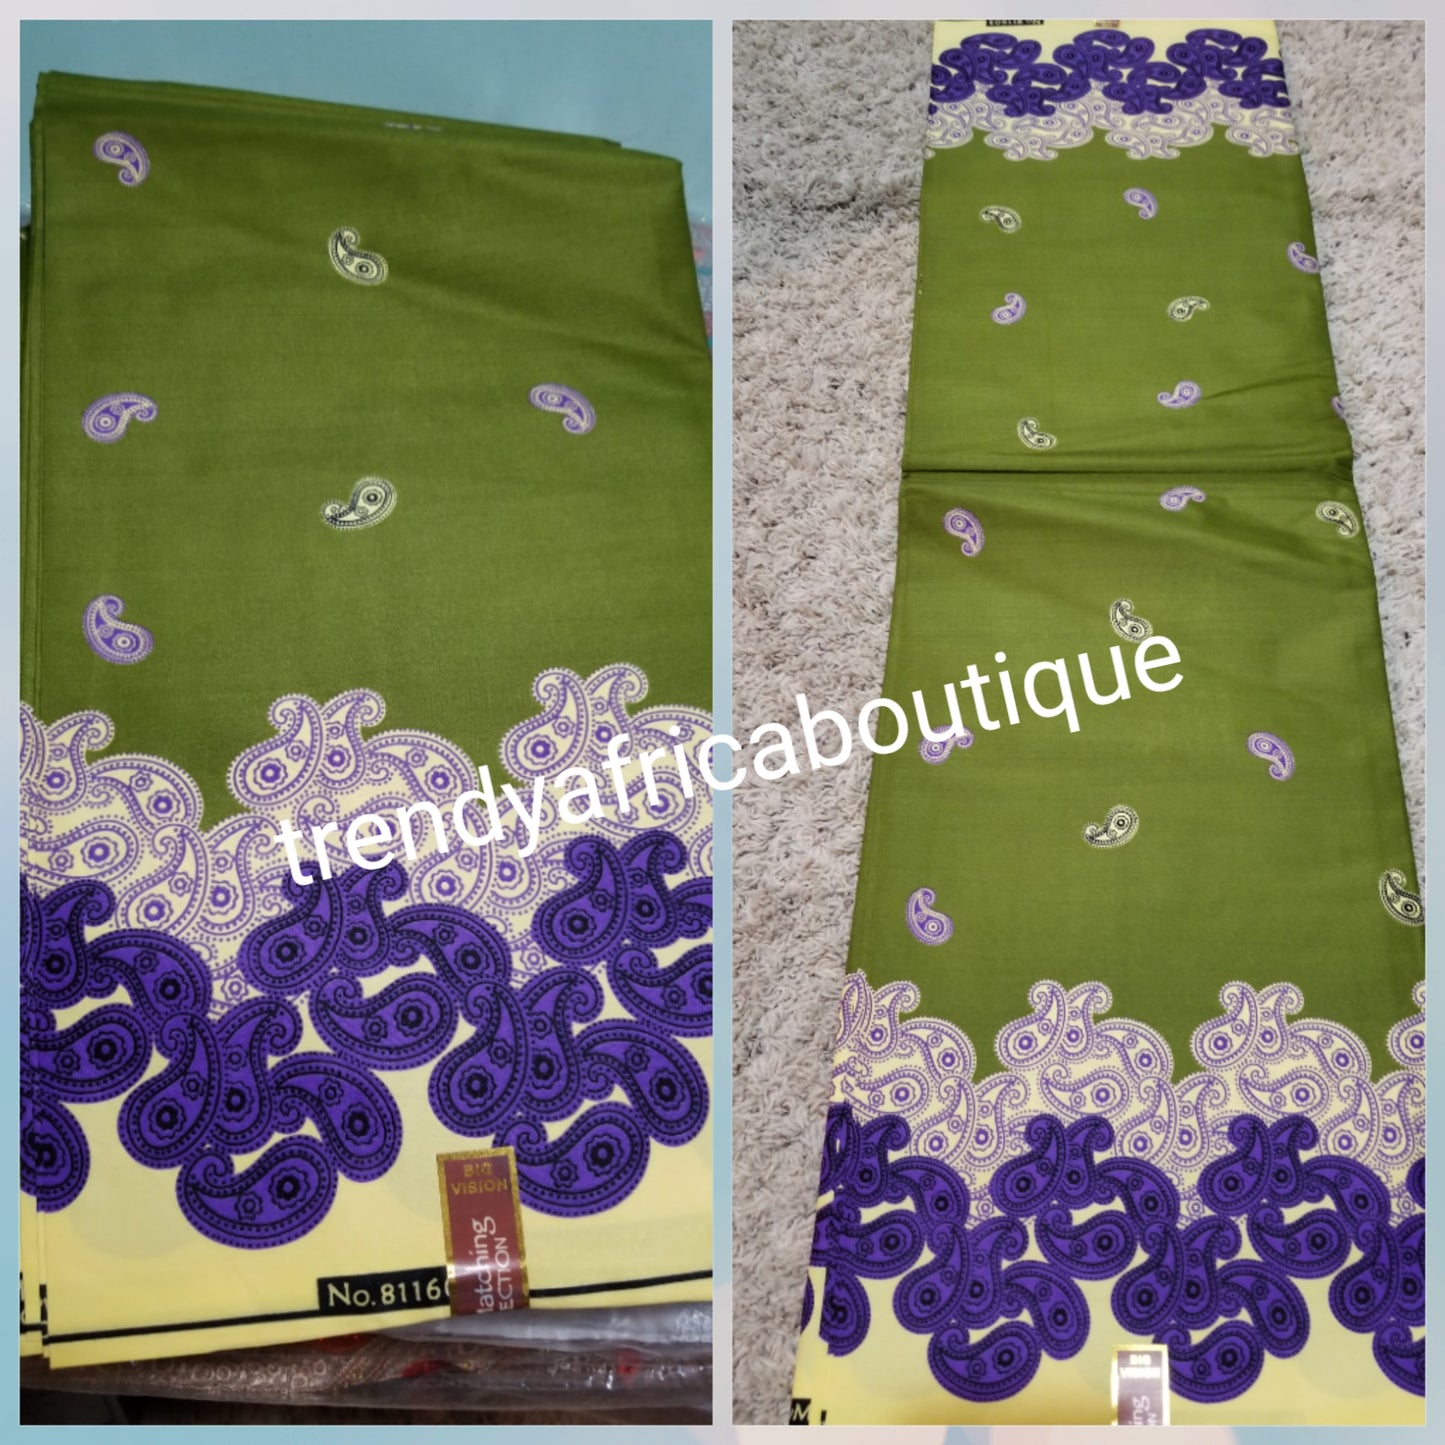 Sale Sale: Green/ purple/white border Ankara print. Special design. 100% west African Wax print fabric. Sold per 6yds. Price is for 6yds.